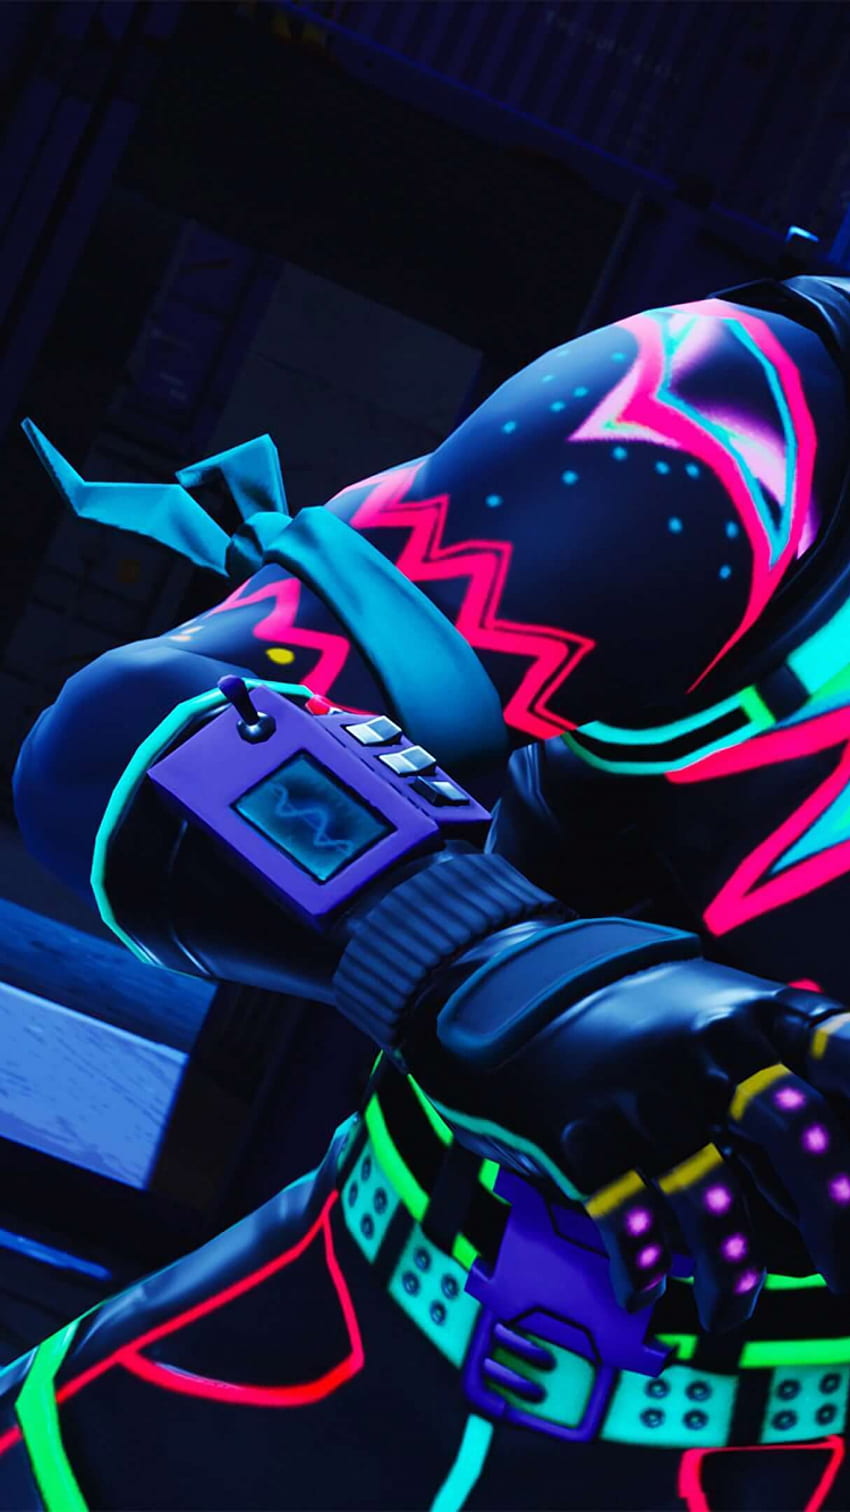 Fortnite Neon Skins 64051 px [] for your , Mobile & Tablet. Explore Fortnite Skins . Fortnite Skins , Best Fortnite Skins , Football Fortnite Skins , Cool Neon Fortnite HD phone wallpaper